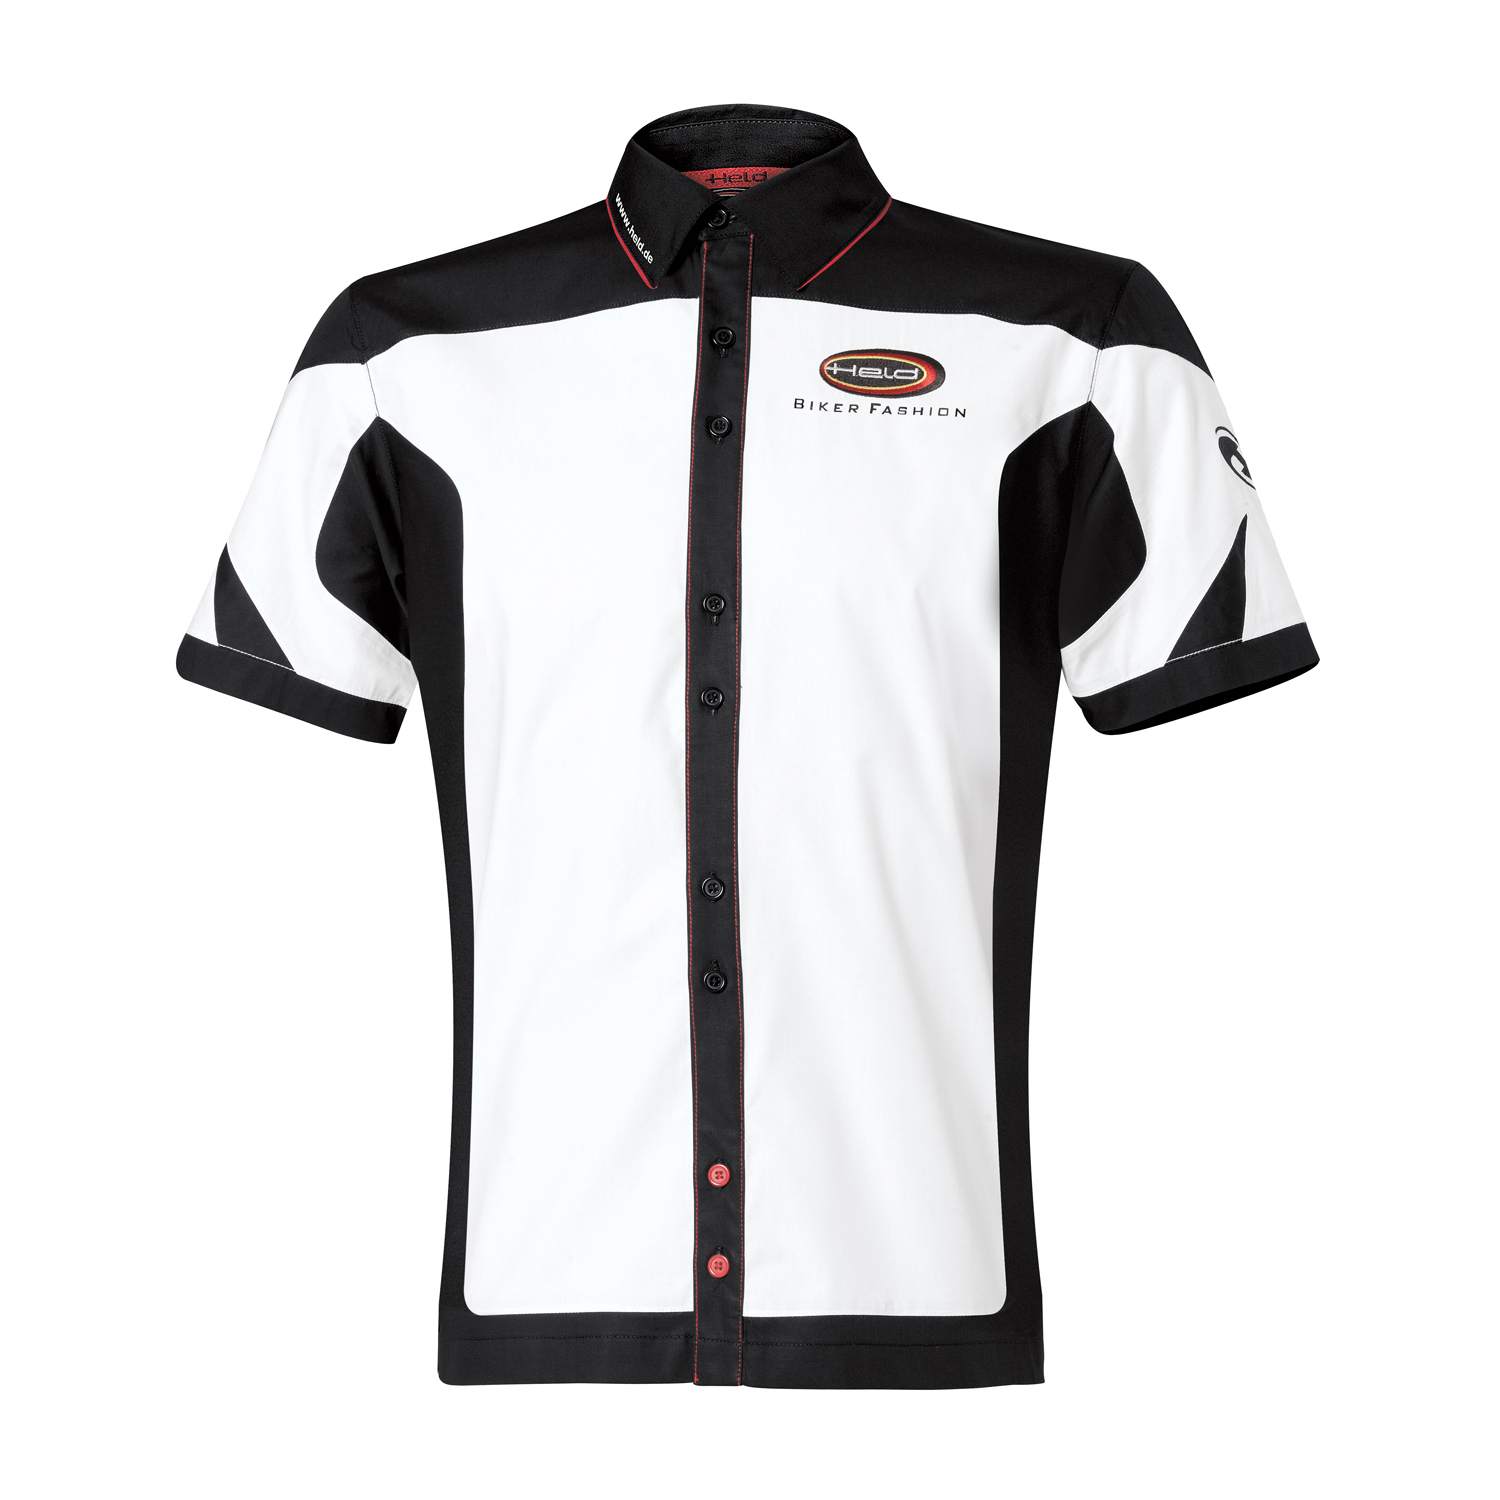 Held Team Cotton Shirt White-Black - Available in Various Sizes